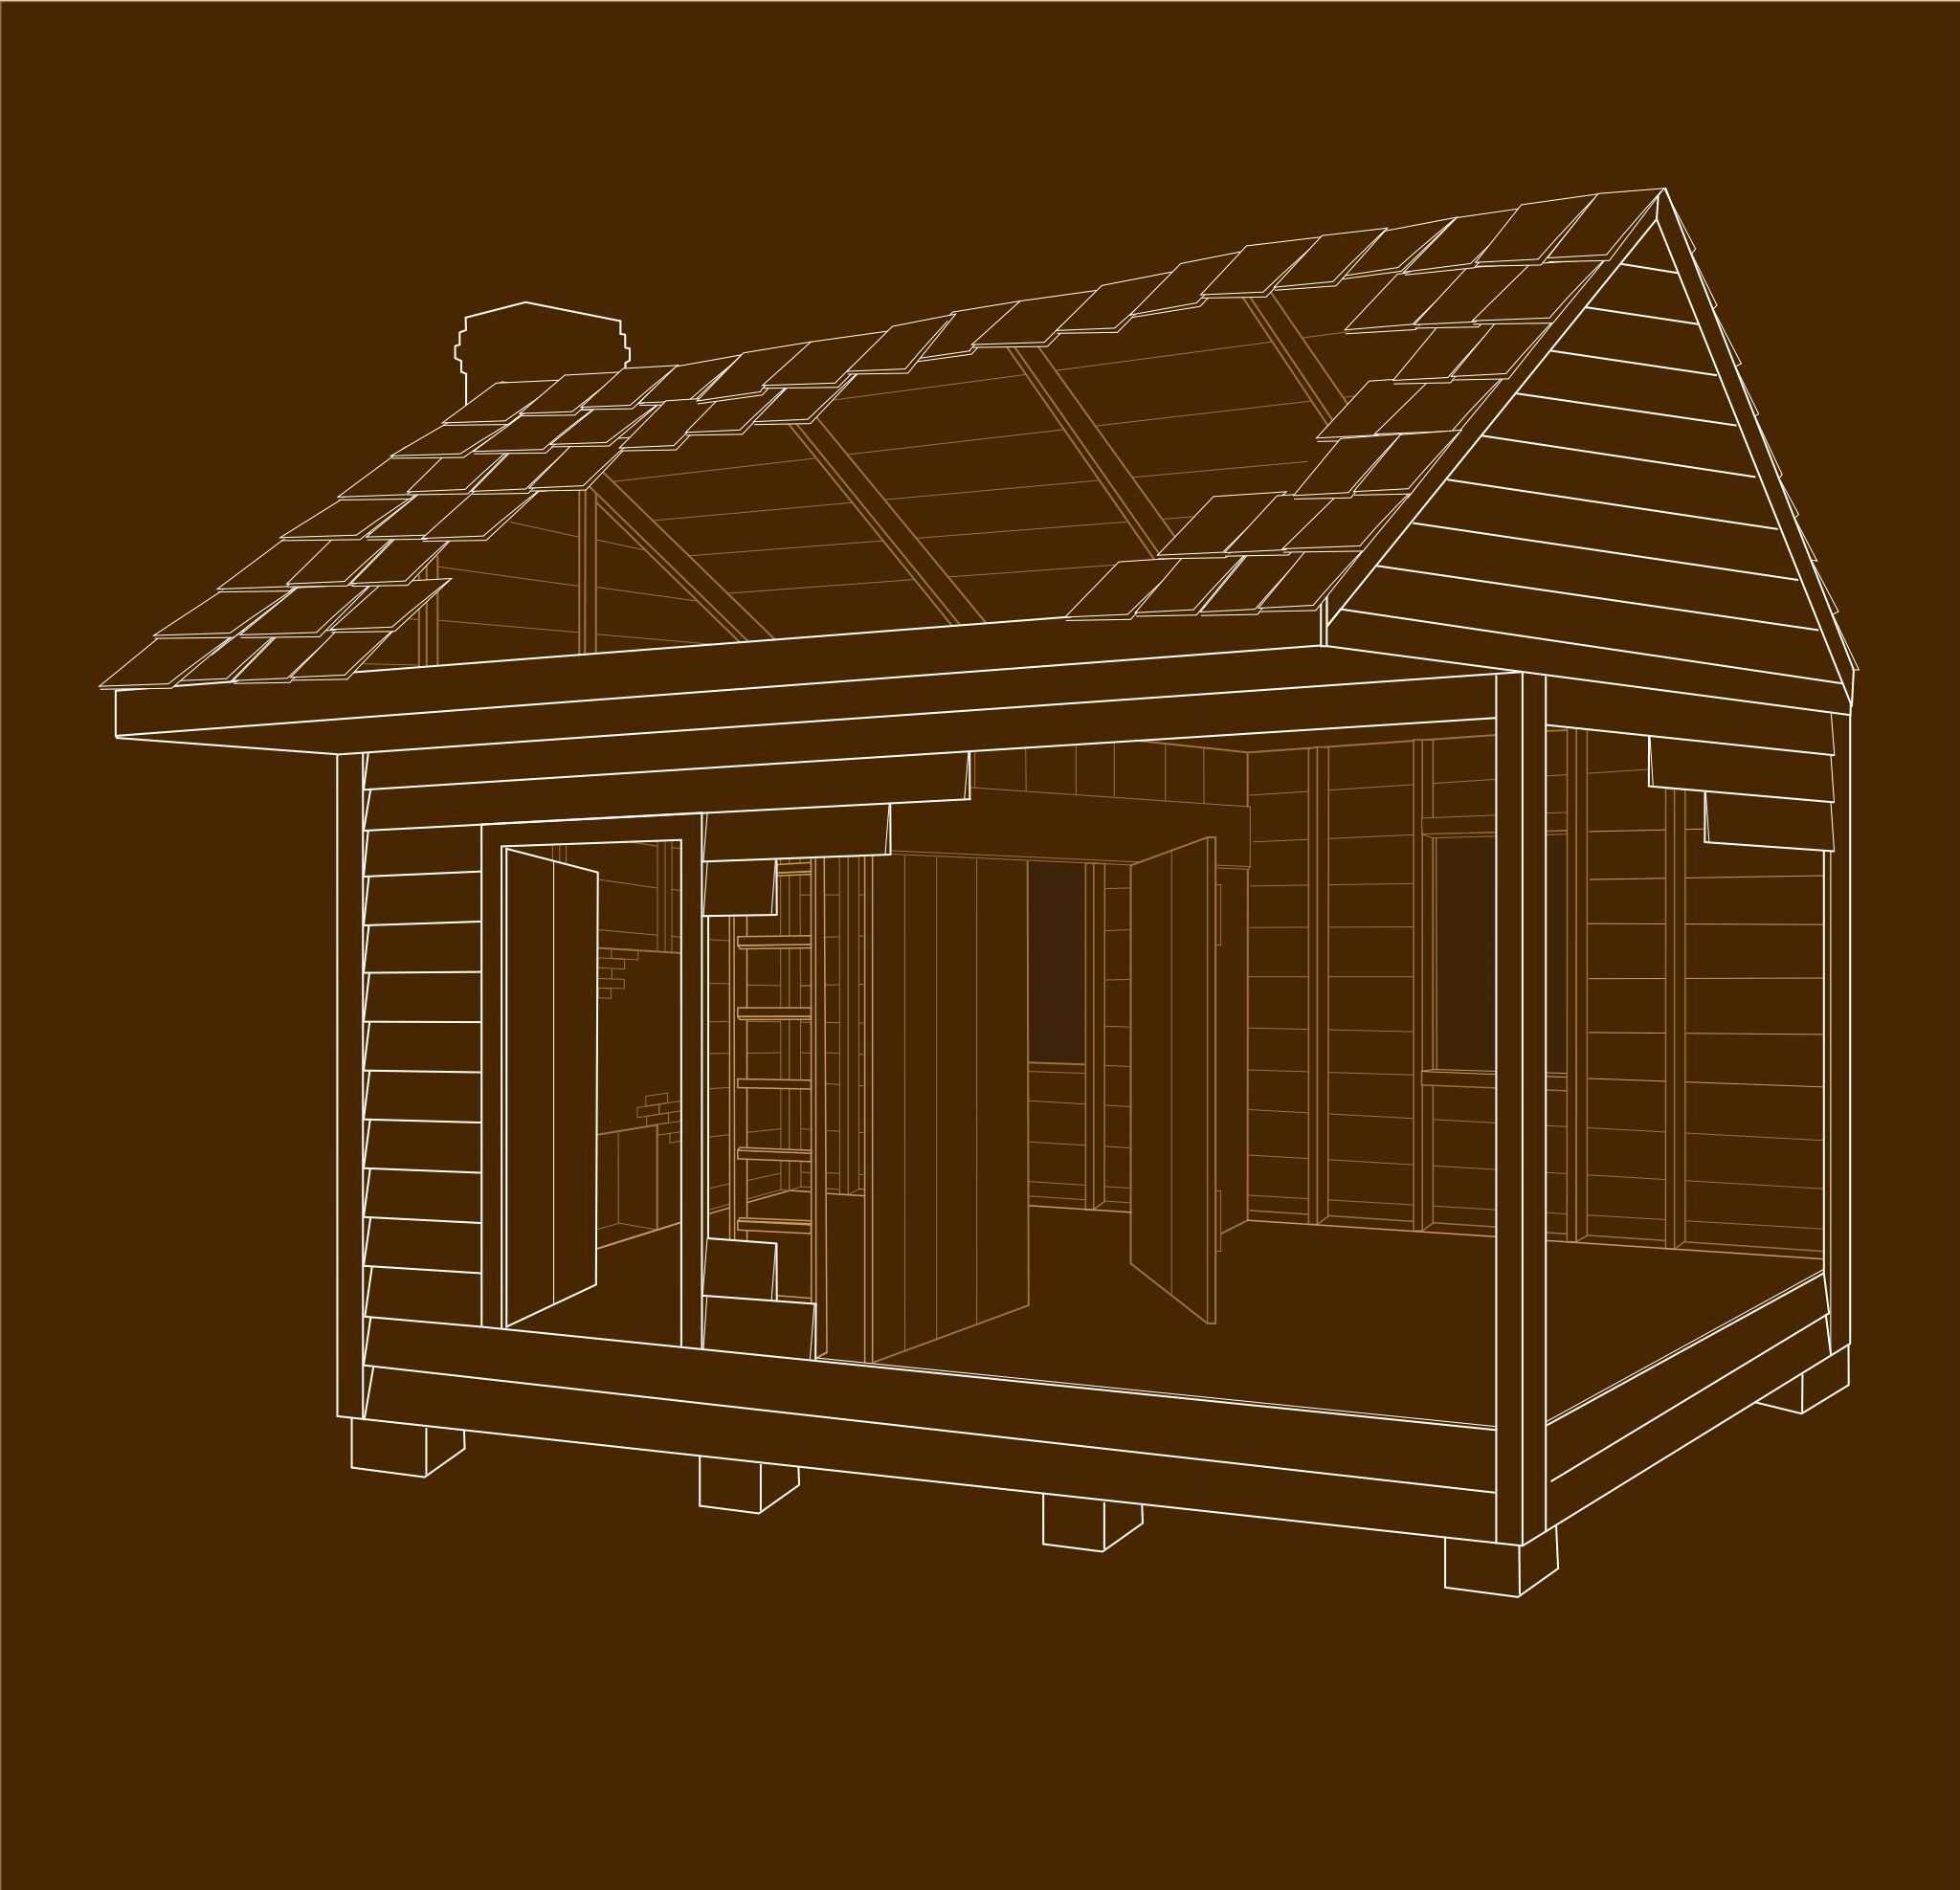 Computer-aided design (CAD) drawing of cabin